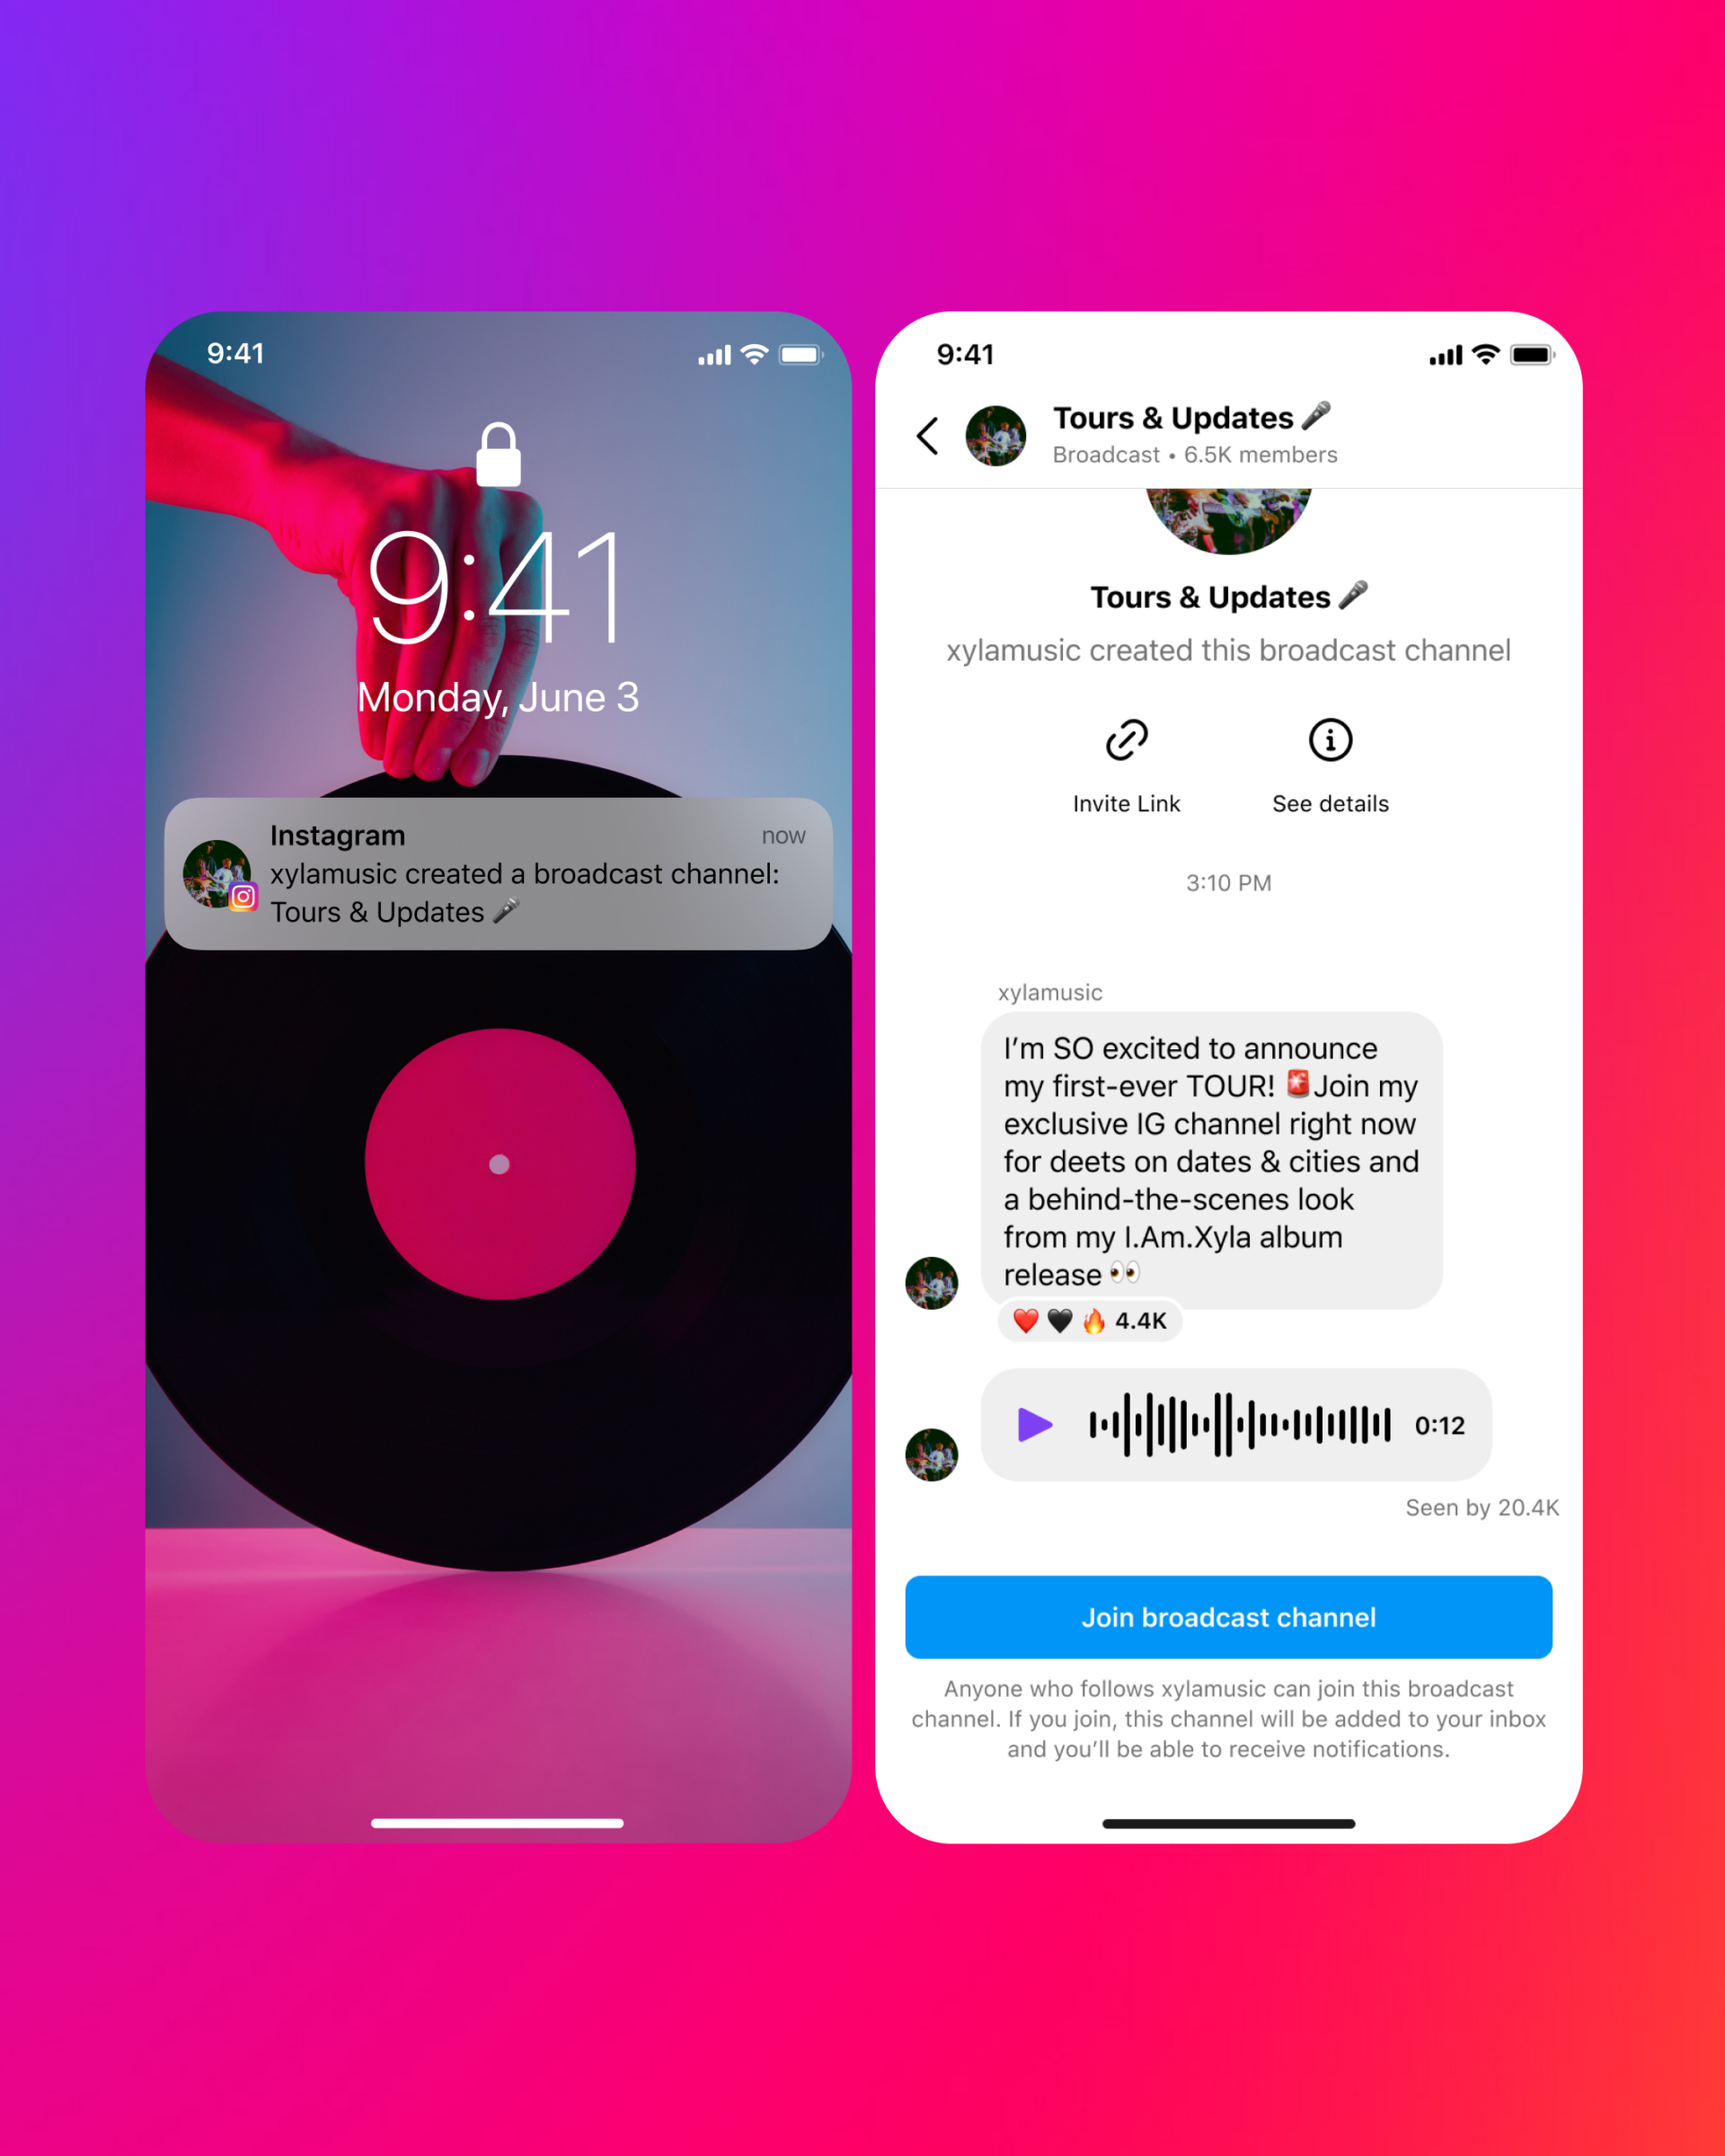 Two phone screens, one showing an Instagram broadcast channel notification and the other showing the ability to join the channel. Both screens are on top of a purple and red background.